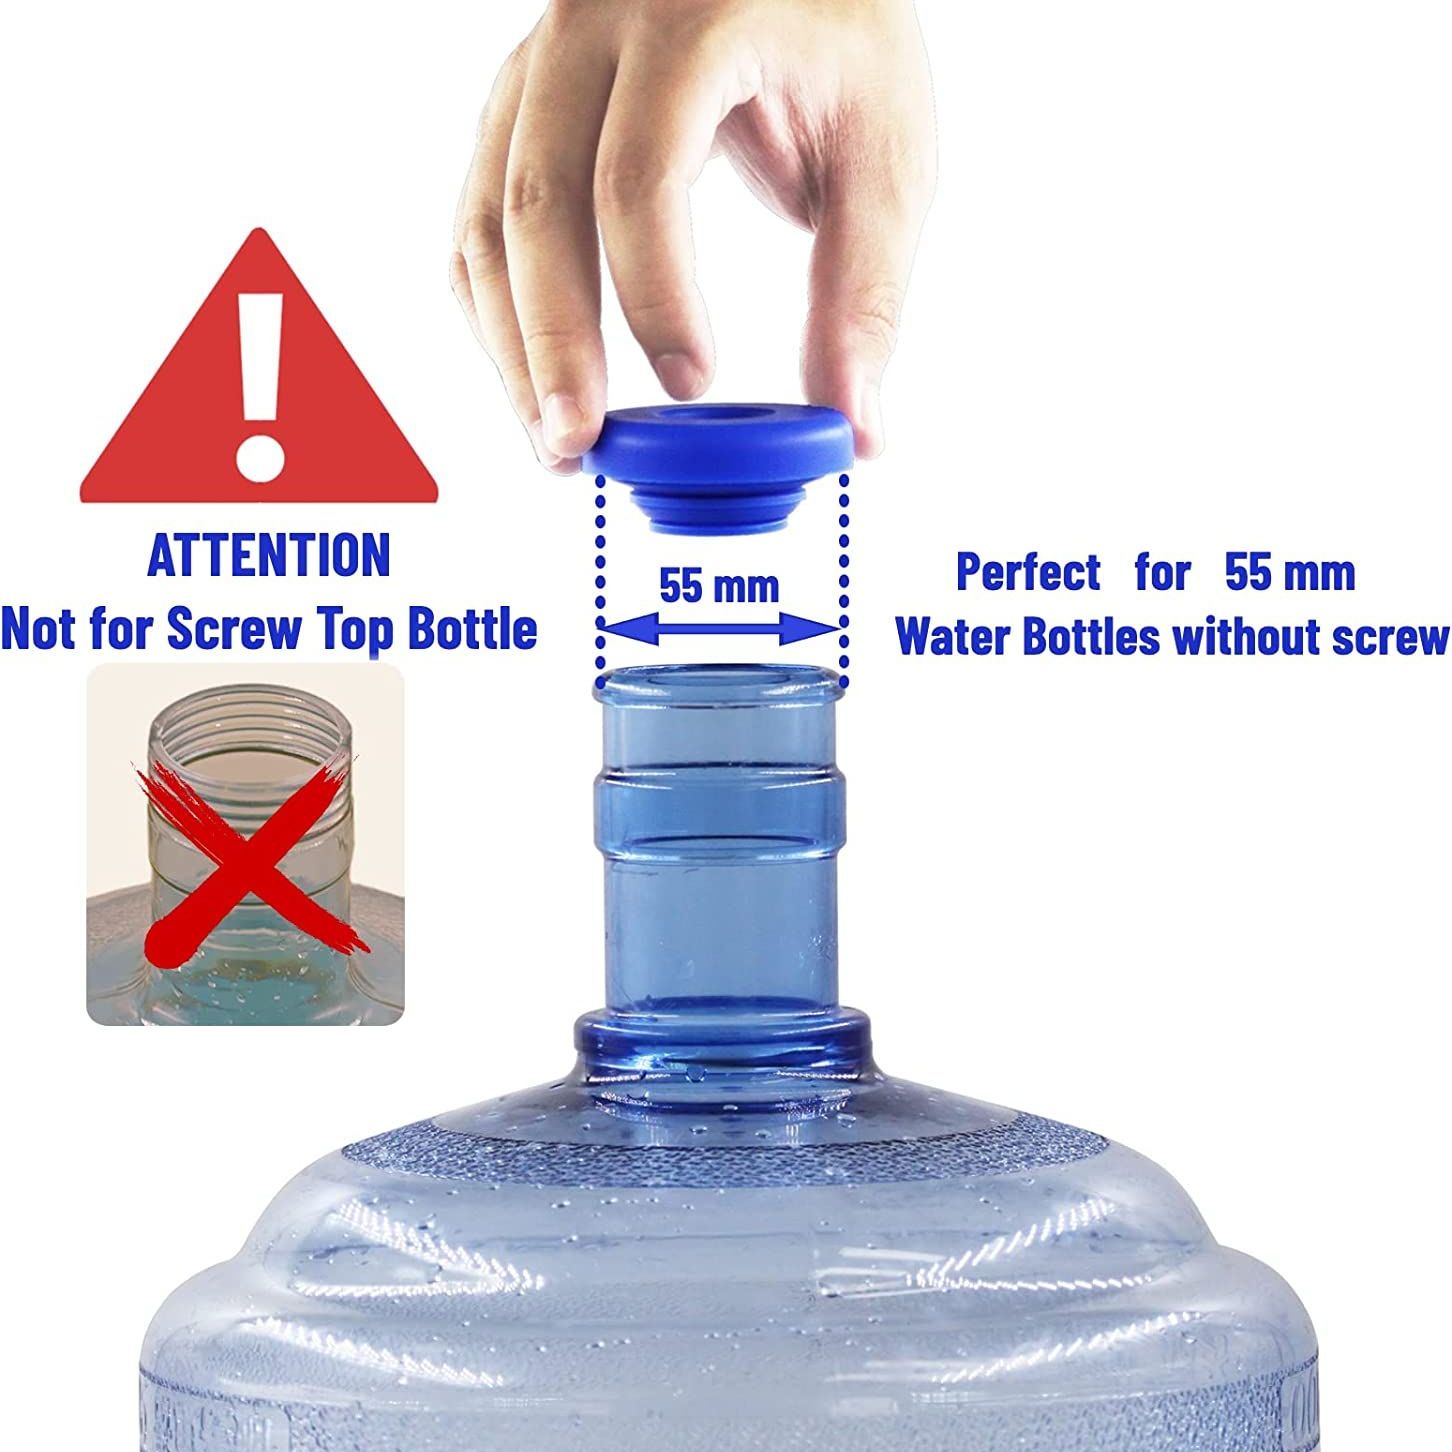 1 gallon (4L) Reusable Water Jug with Screw-on Cap